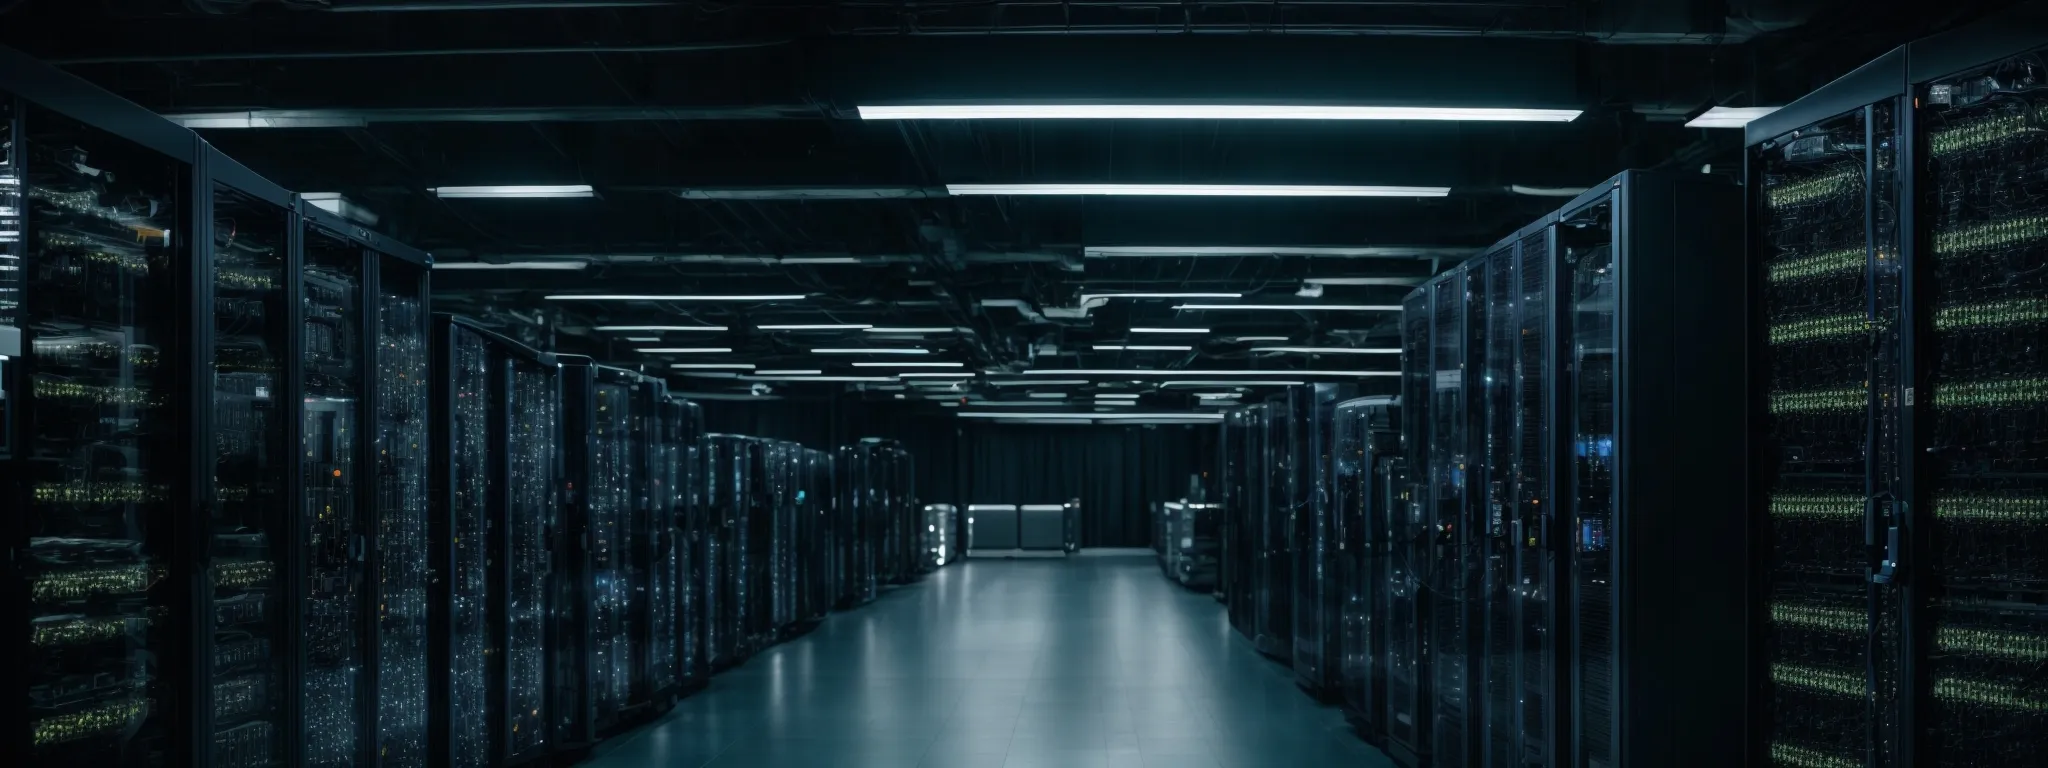 a vast server room illuminated by the blinking lights of numerous machines, symbolizing the digital infrastructure that web crawlers navigate.